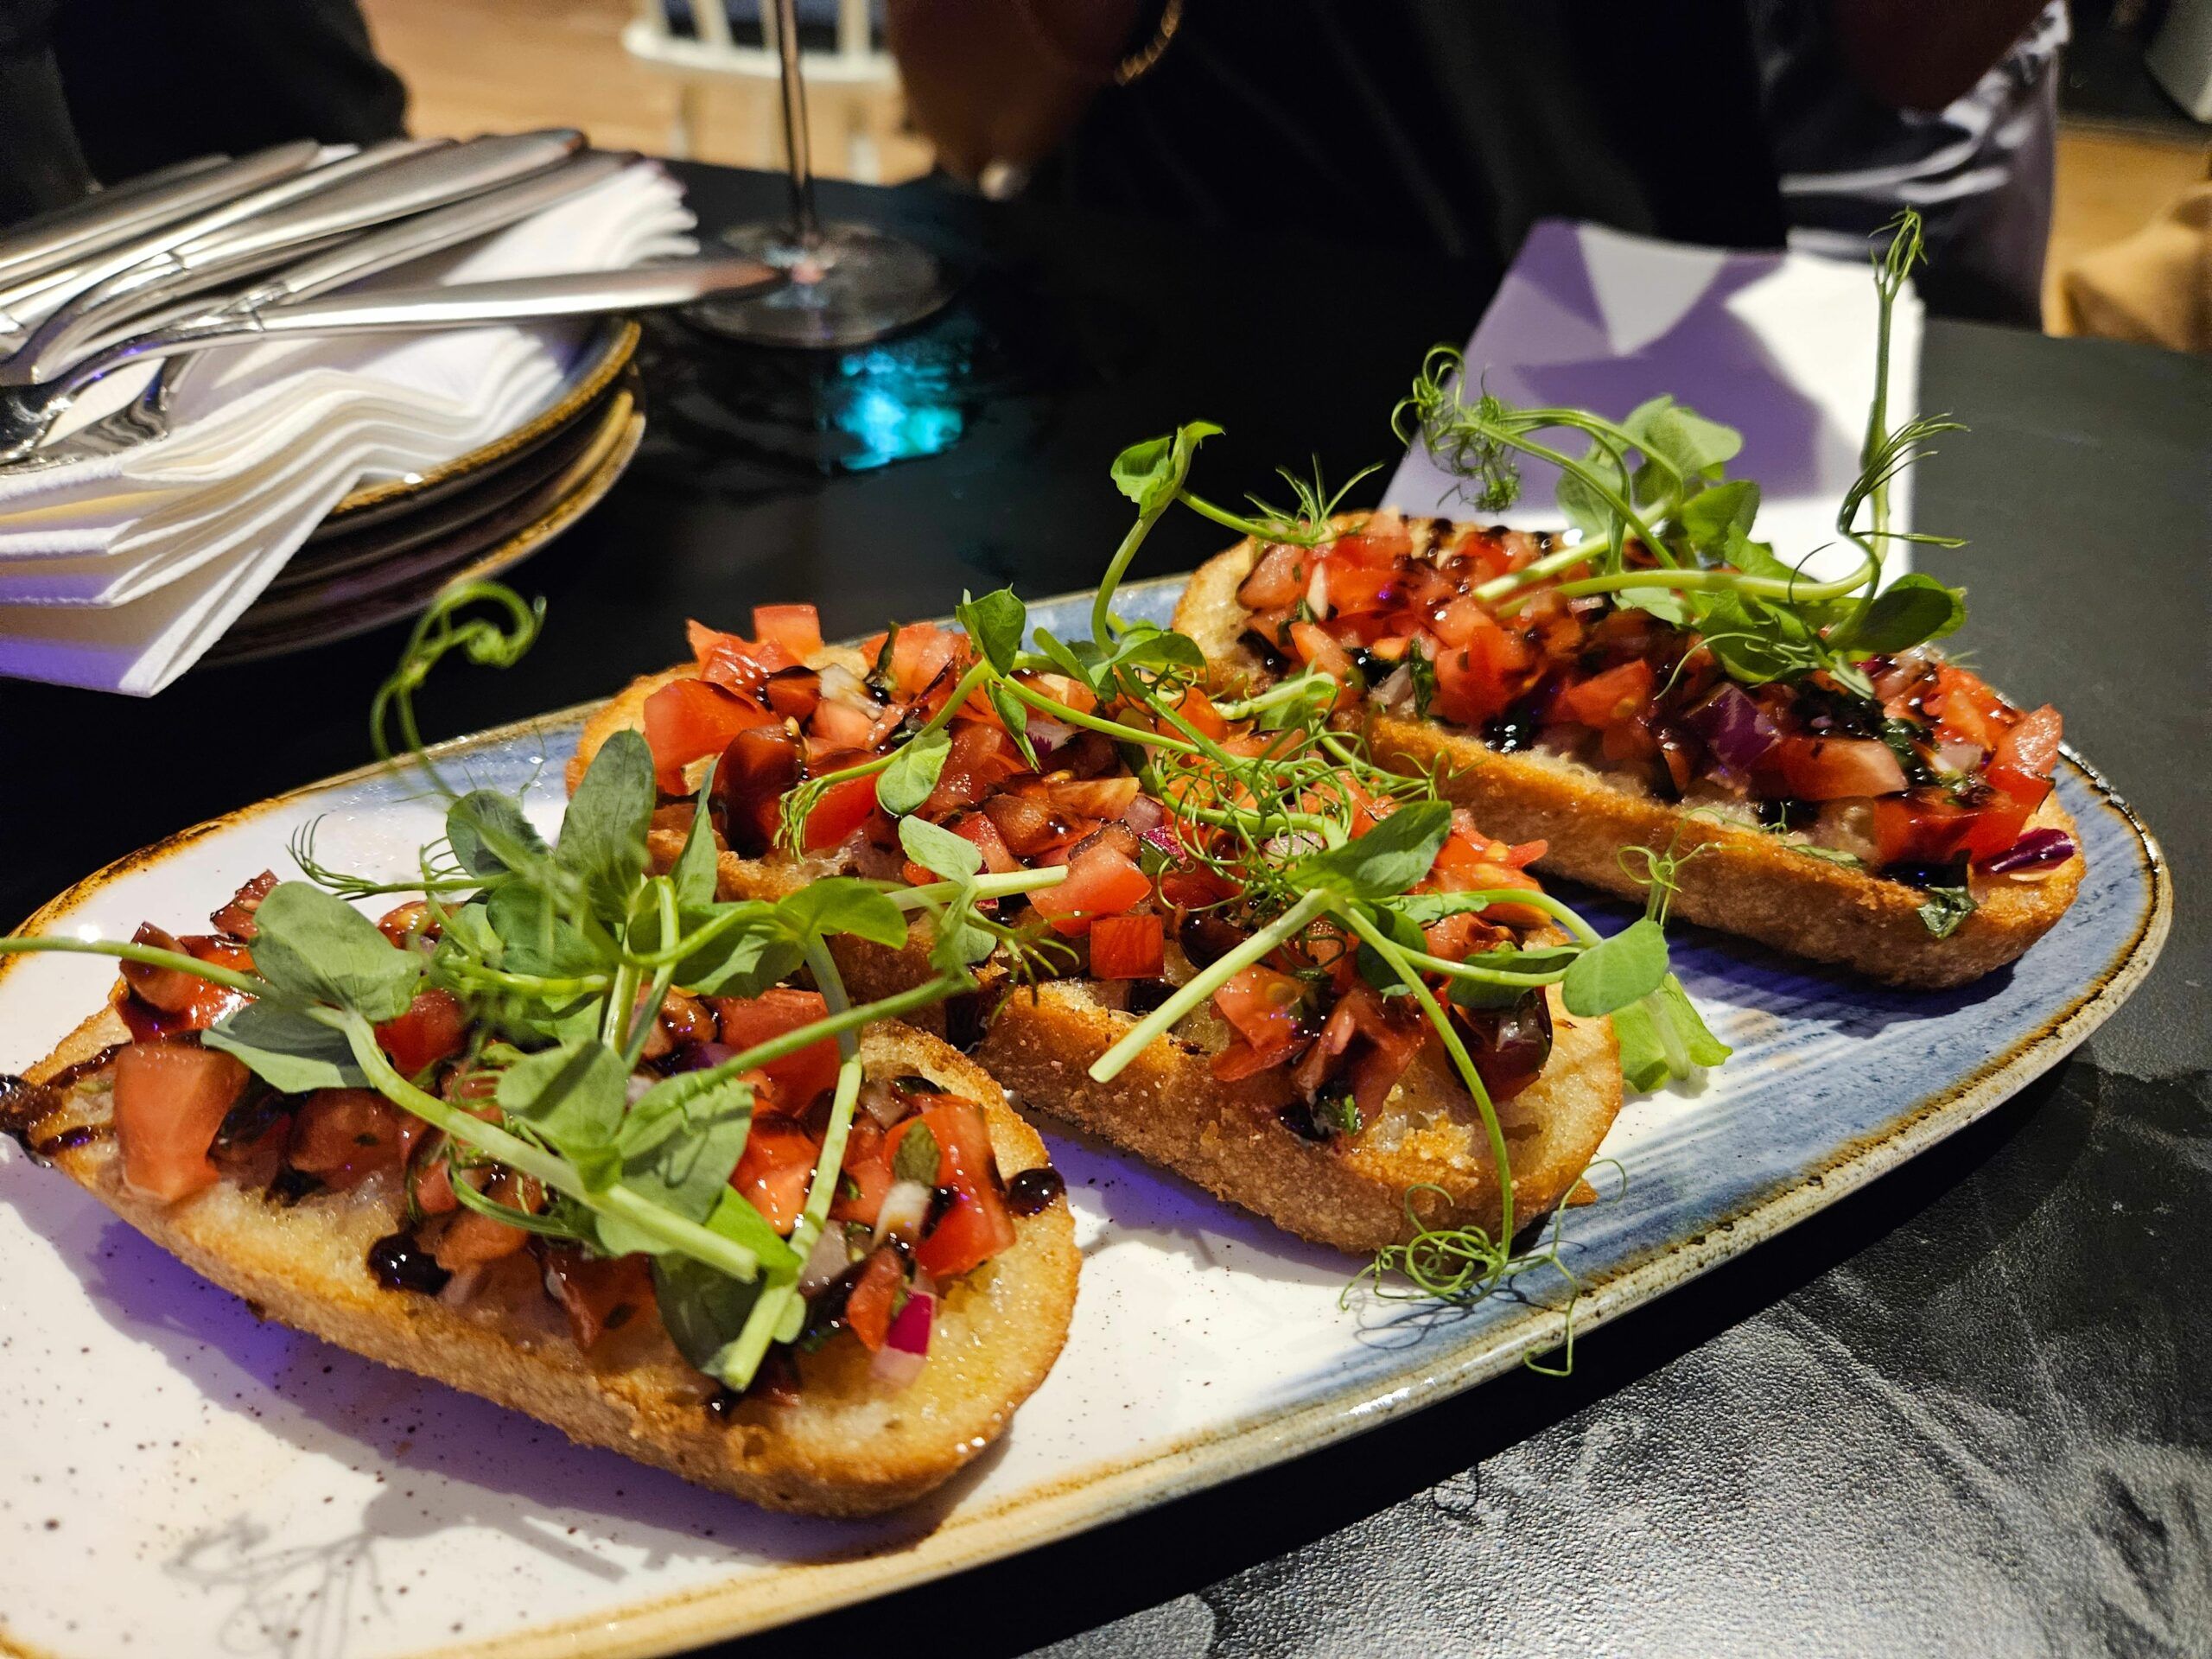 bright, fresh vegetarian bruschetta drizzled with sweet balsamic glaze. The bread was golden and crunchy with a great pile of fresh tomato topped with micro herbs